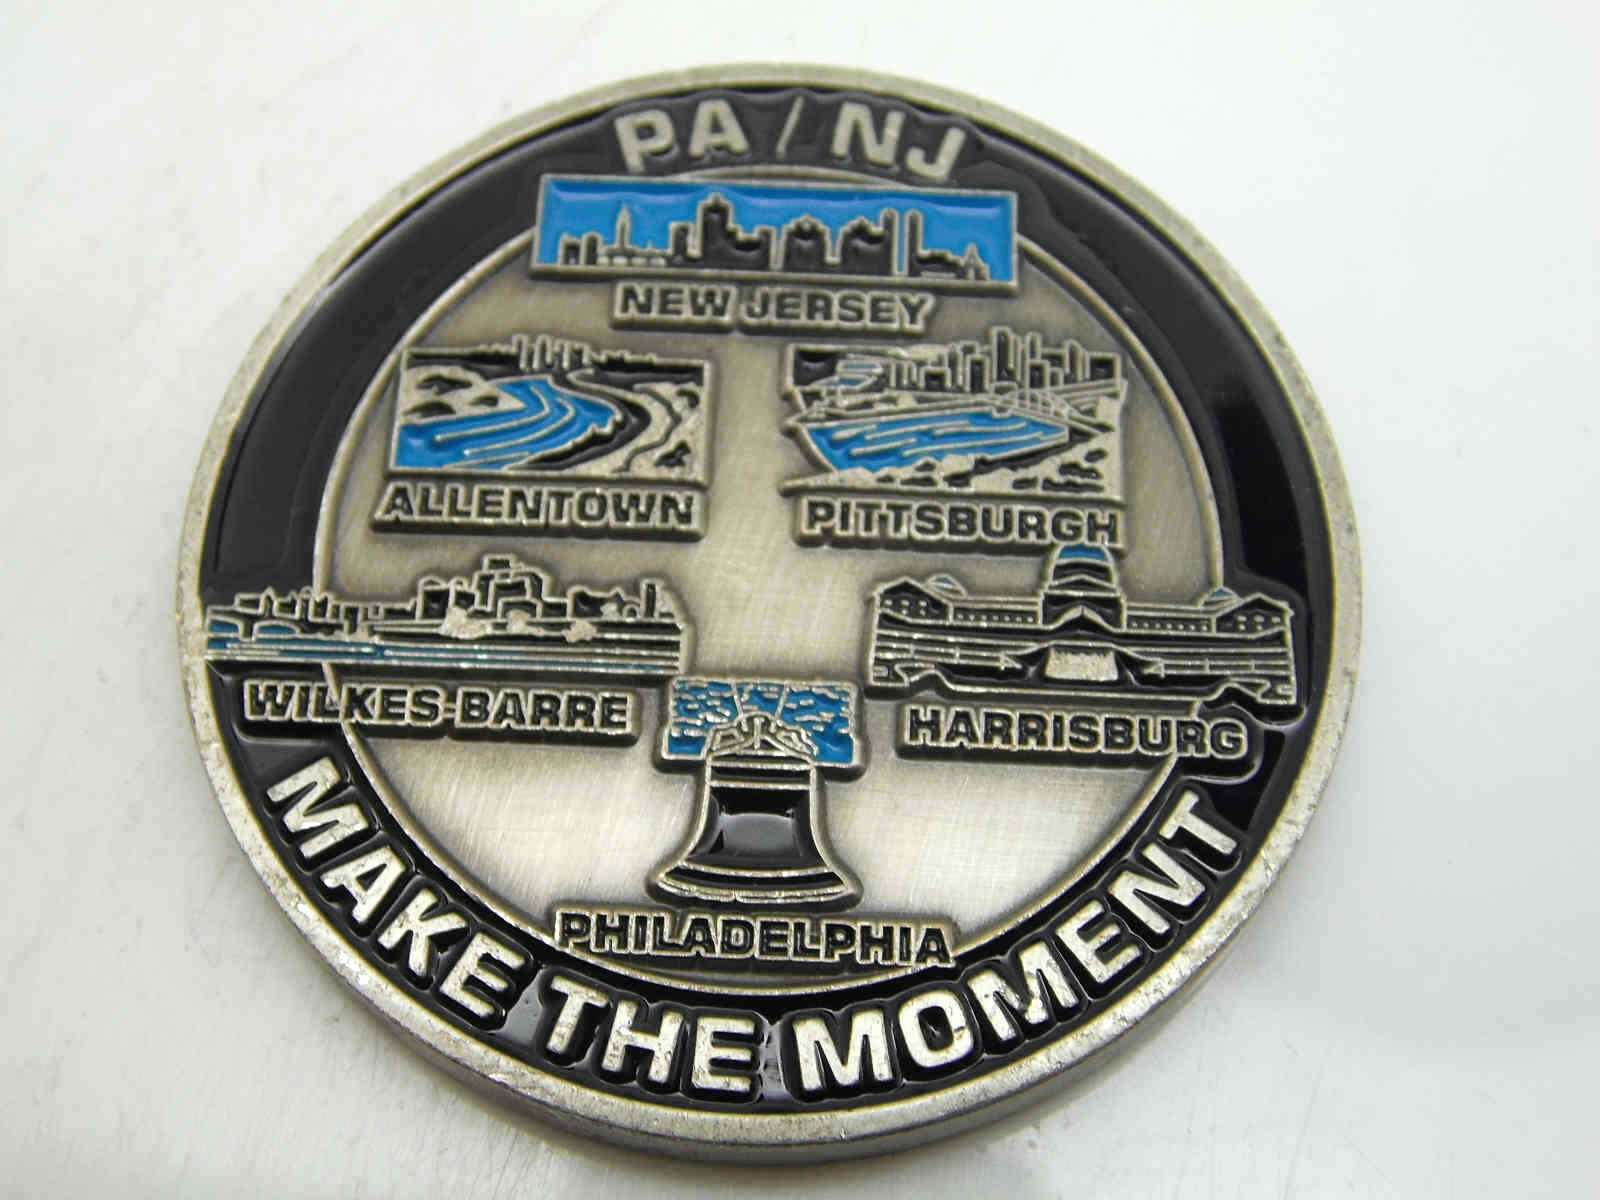 PA NJ MAKE THE MOMENT CHALLENGE COIN